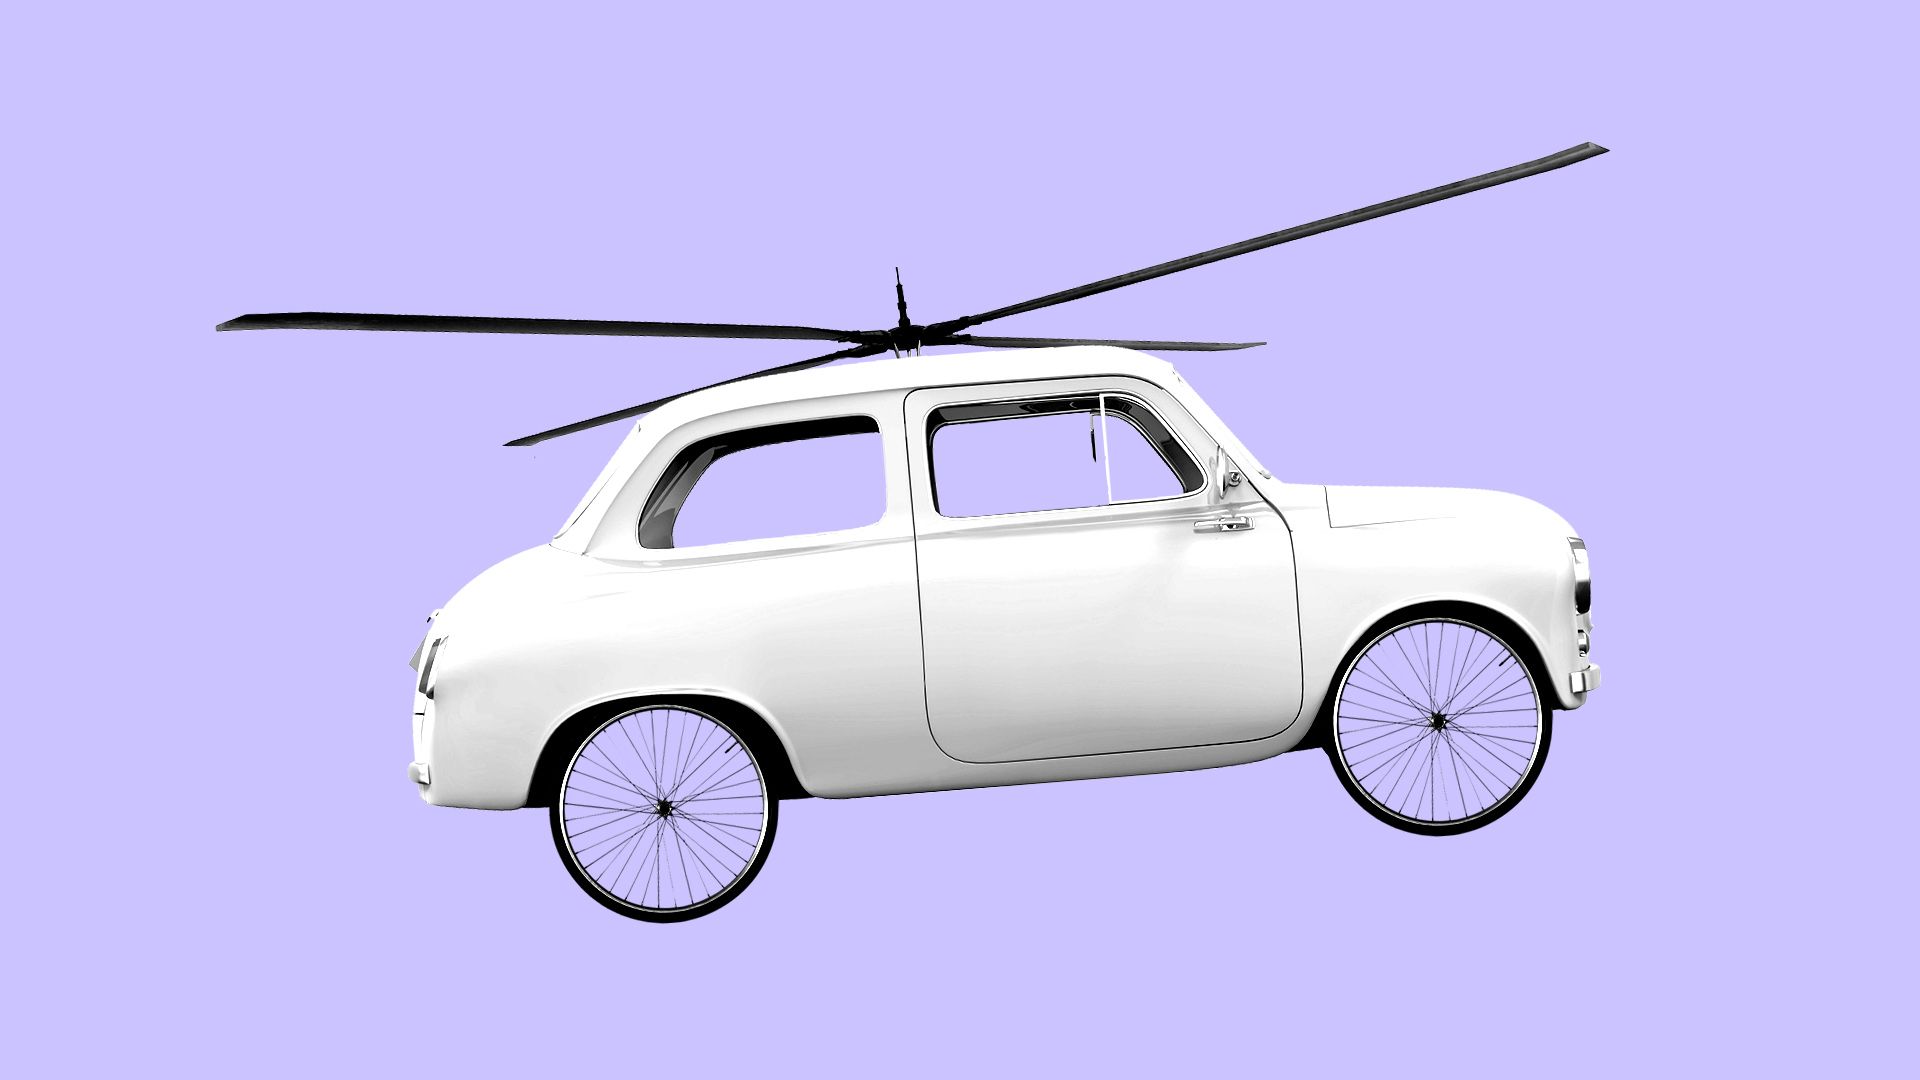 Illustration of car with bicycle tires and a helicopter rotor blade